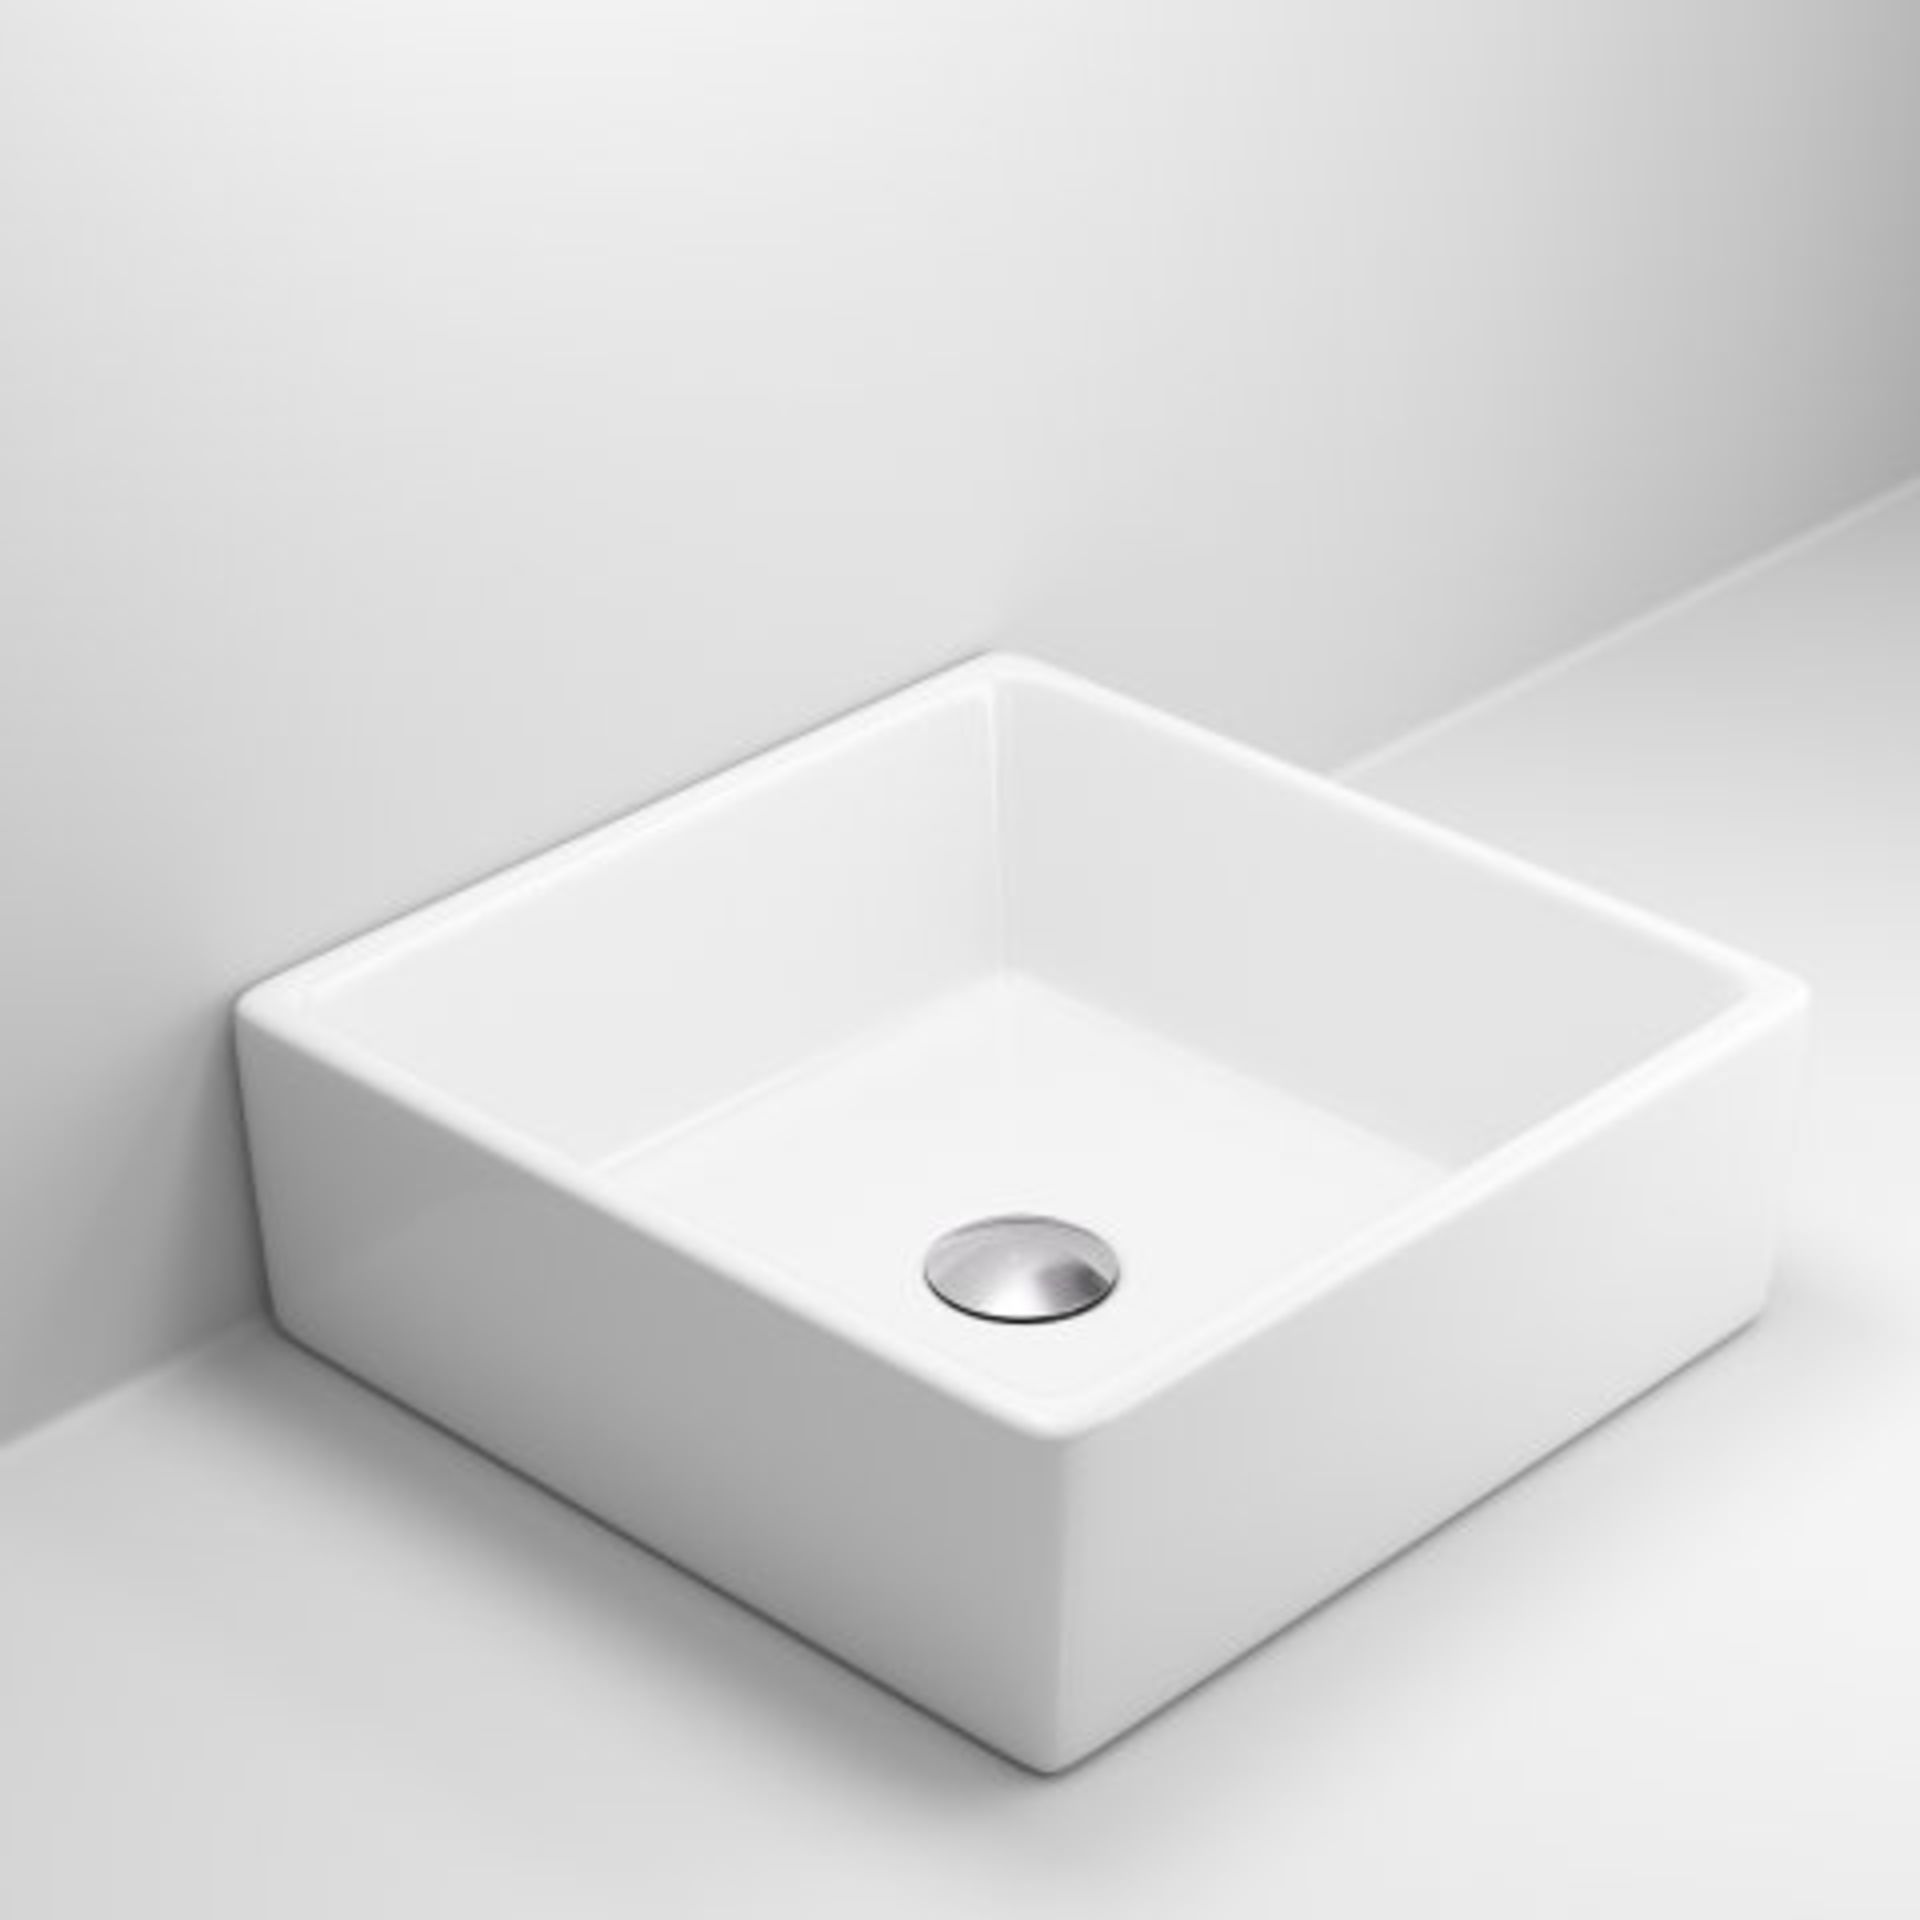 (O51) Rosa Counter Top Basin. RRP £94.99. This contemporary counter top basin offers great - Image 3 of 4